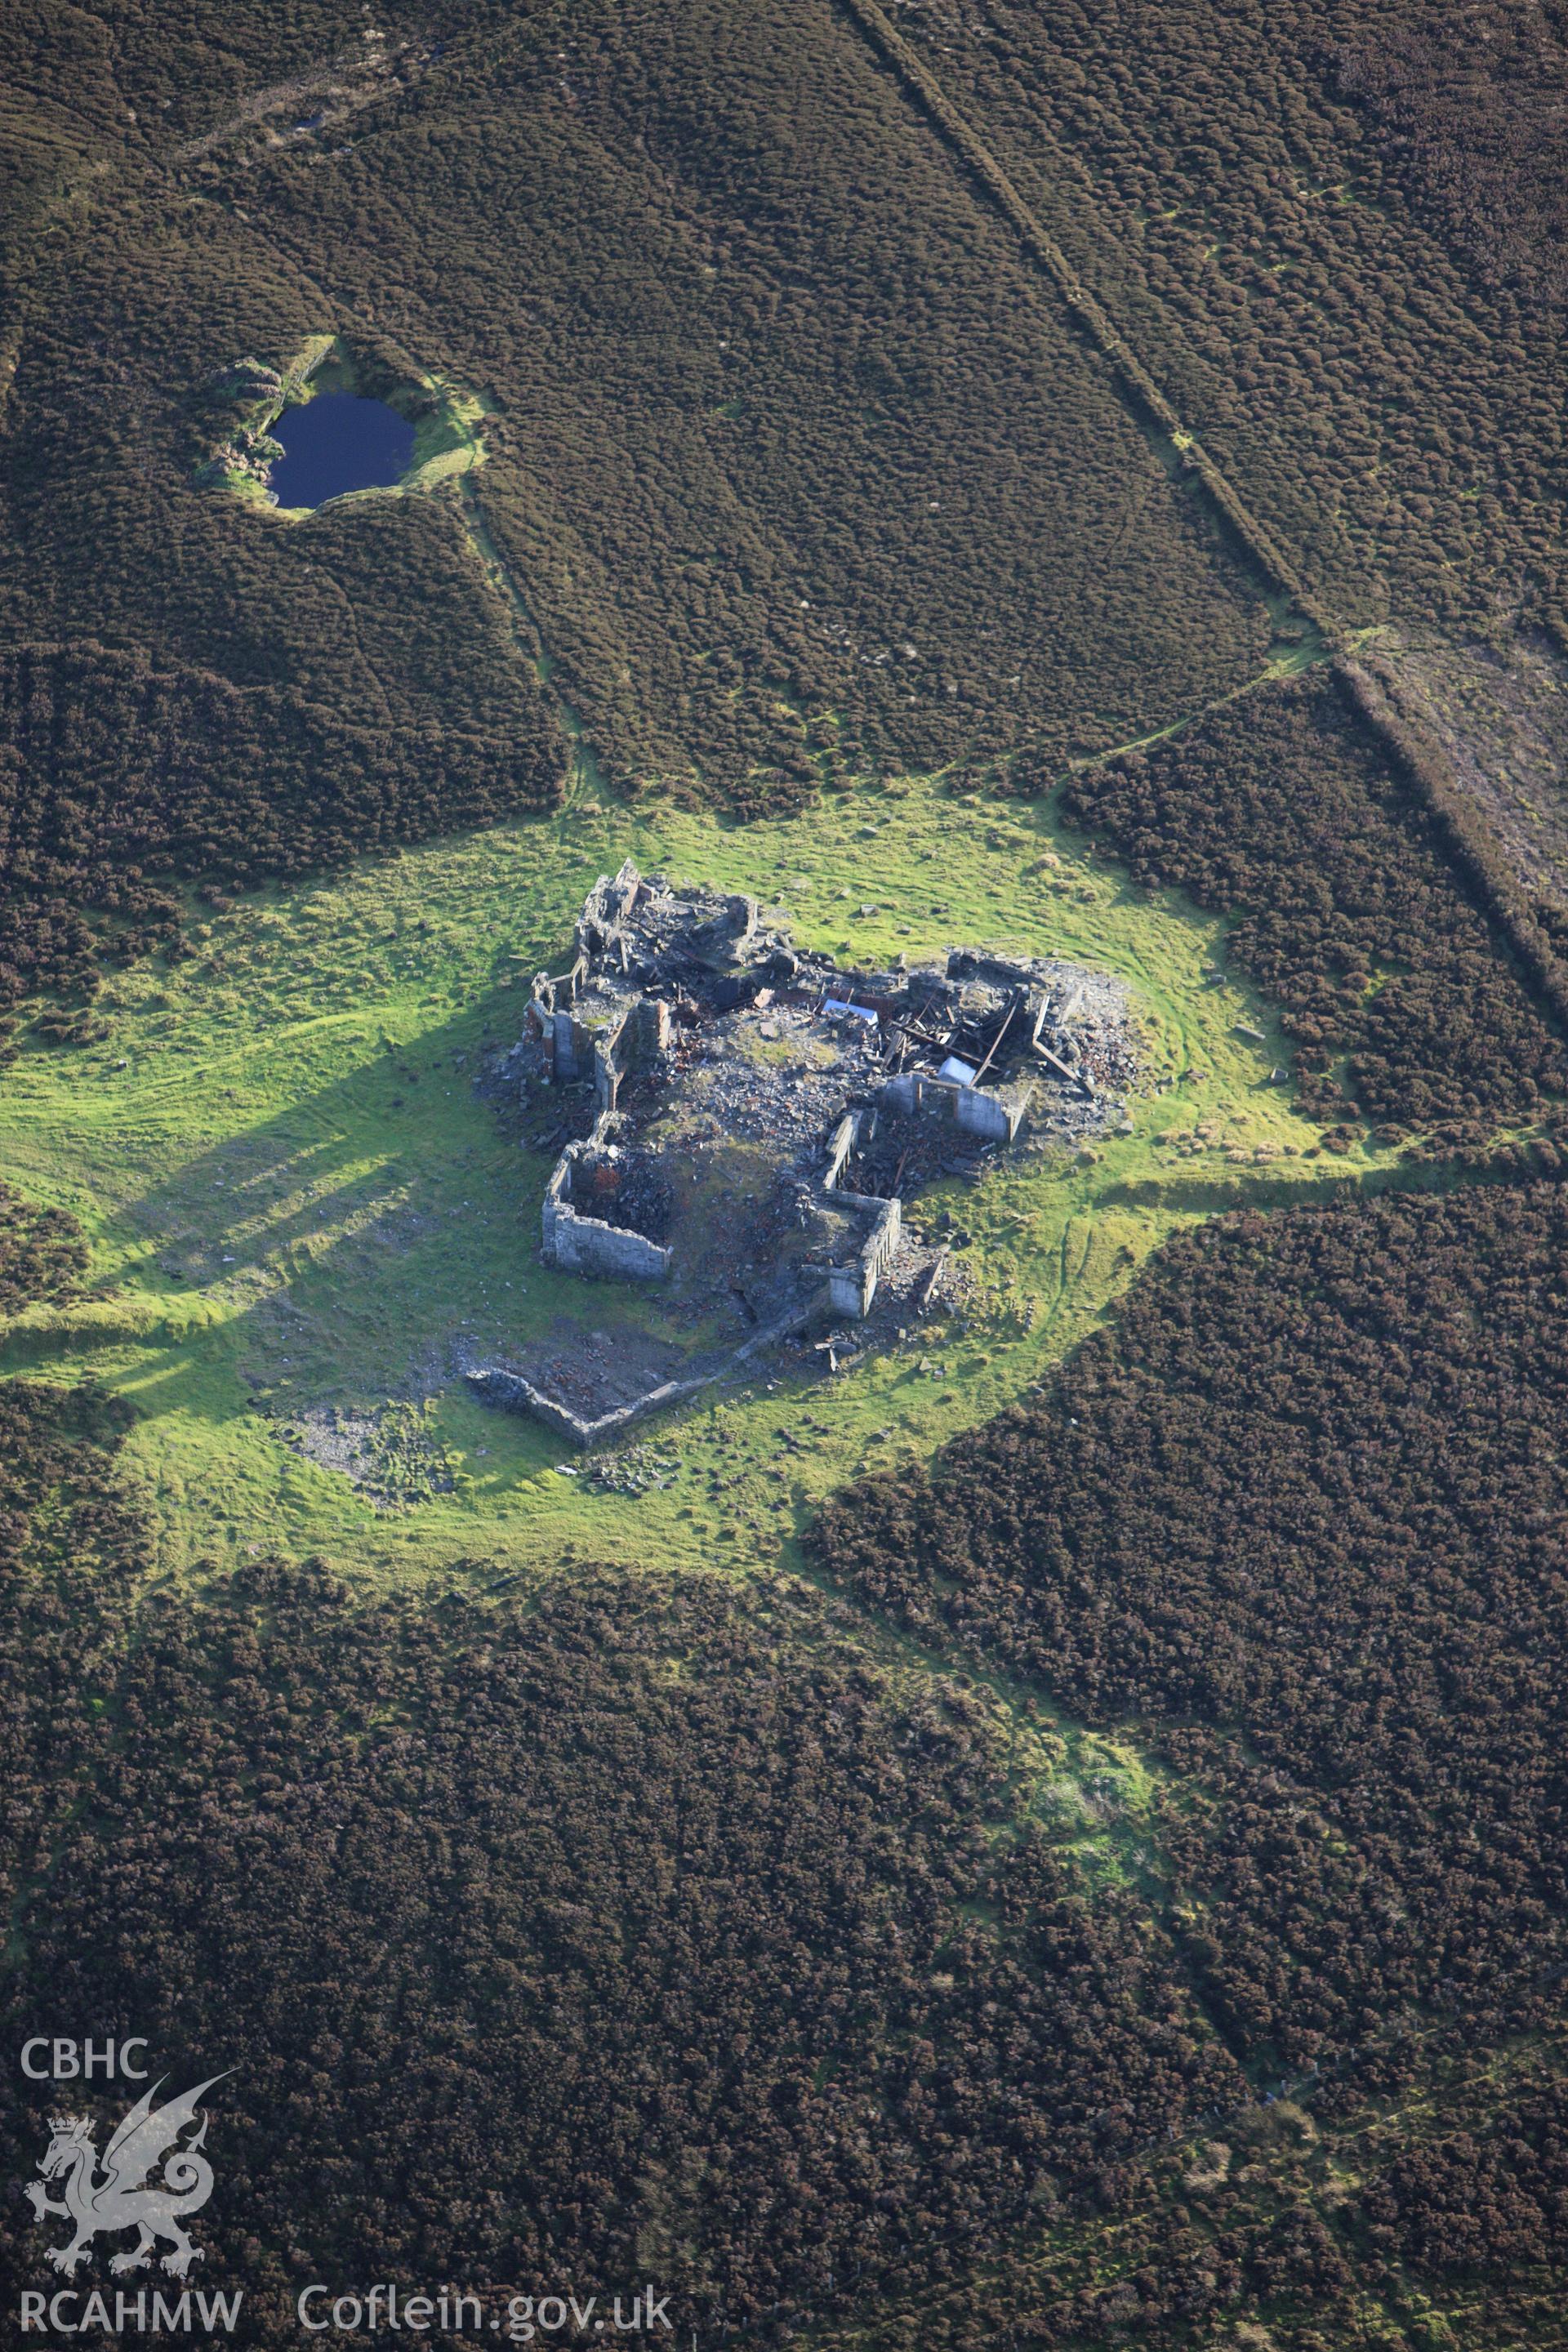 RCAHMW colour oblique aerial photograph of Gwylfa Hiraethog Shooting Lodge, in ruins. Taken on 10 December 2009 by Toby Driver